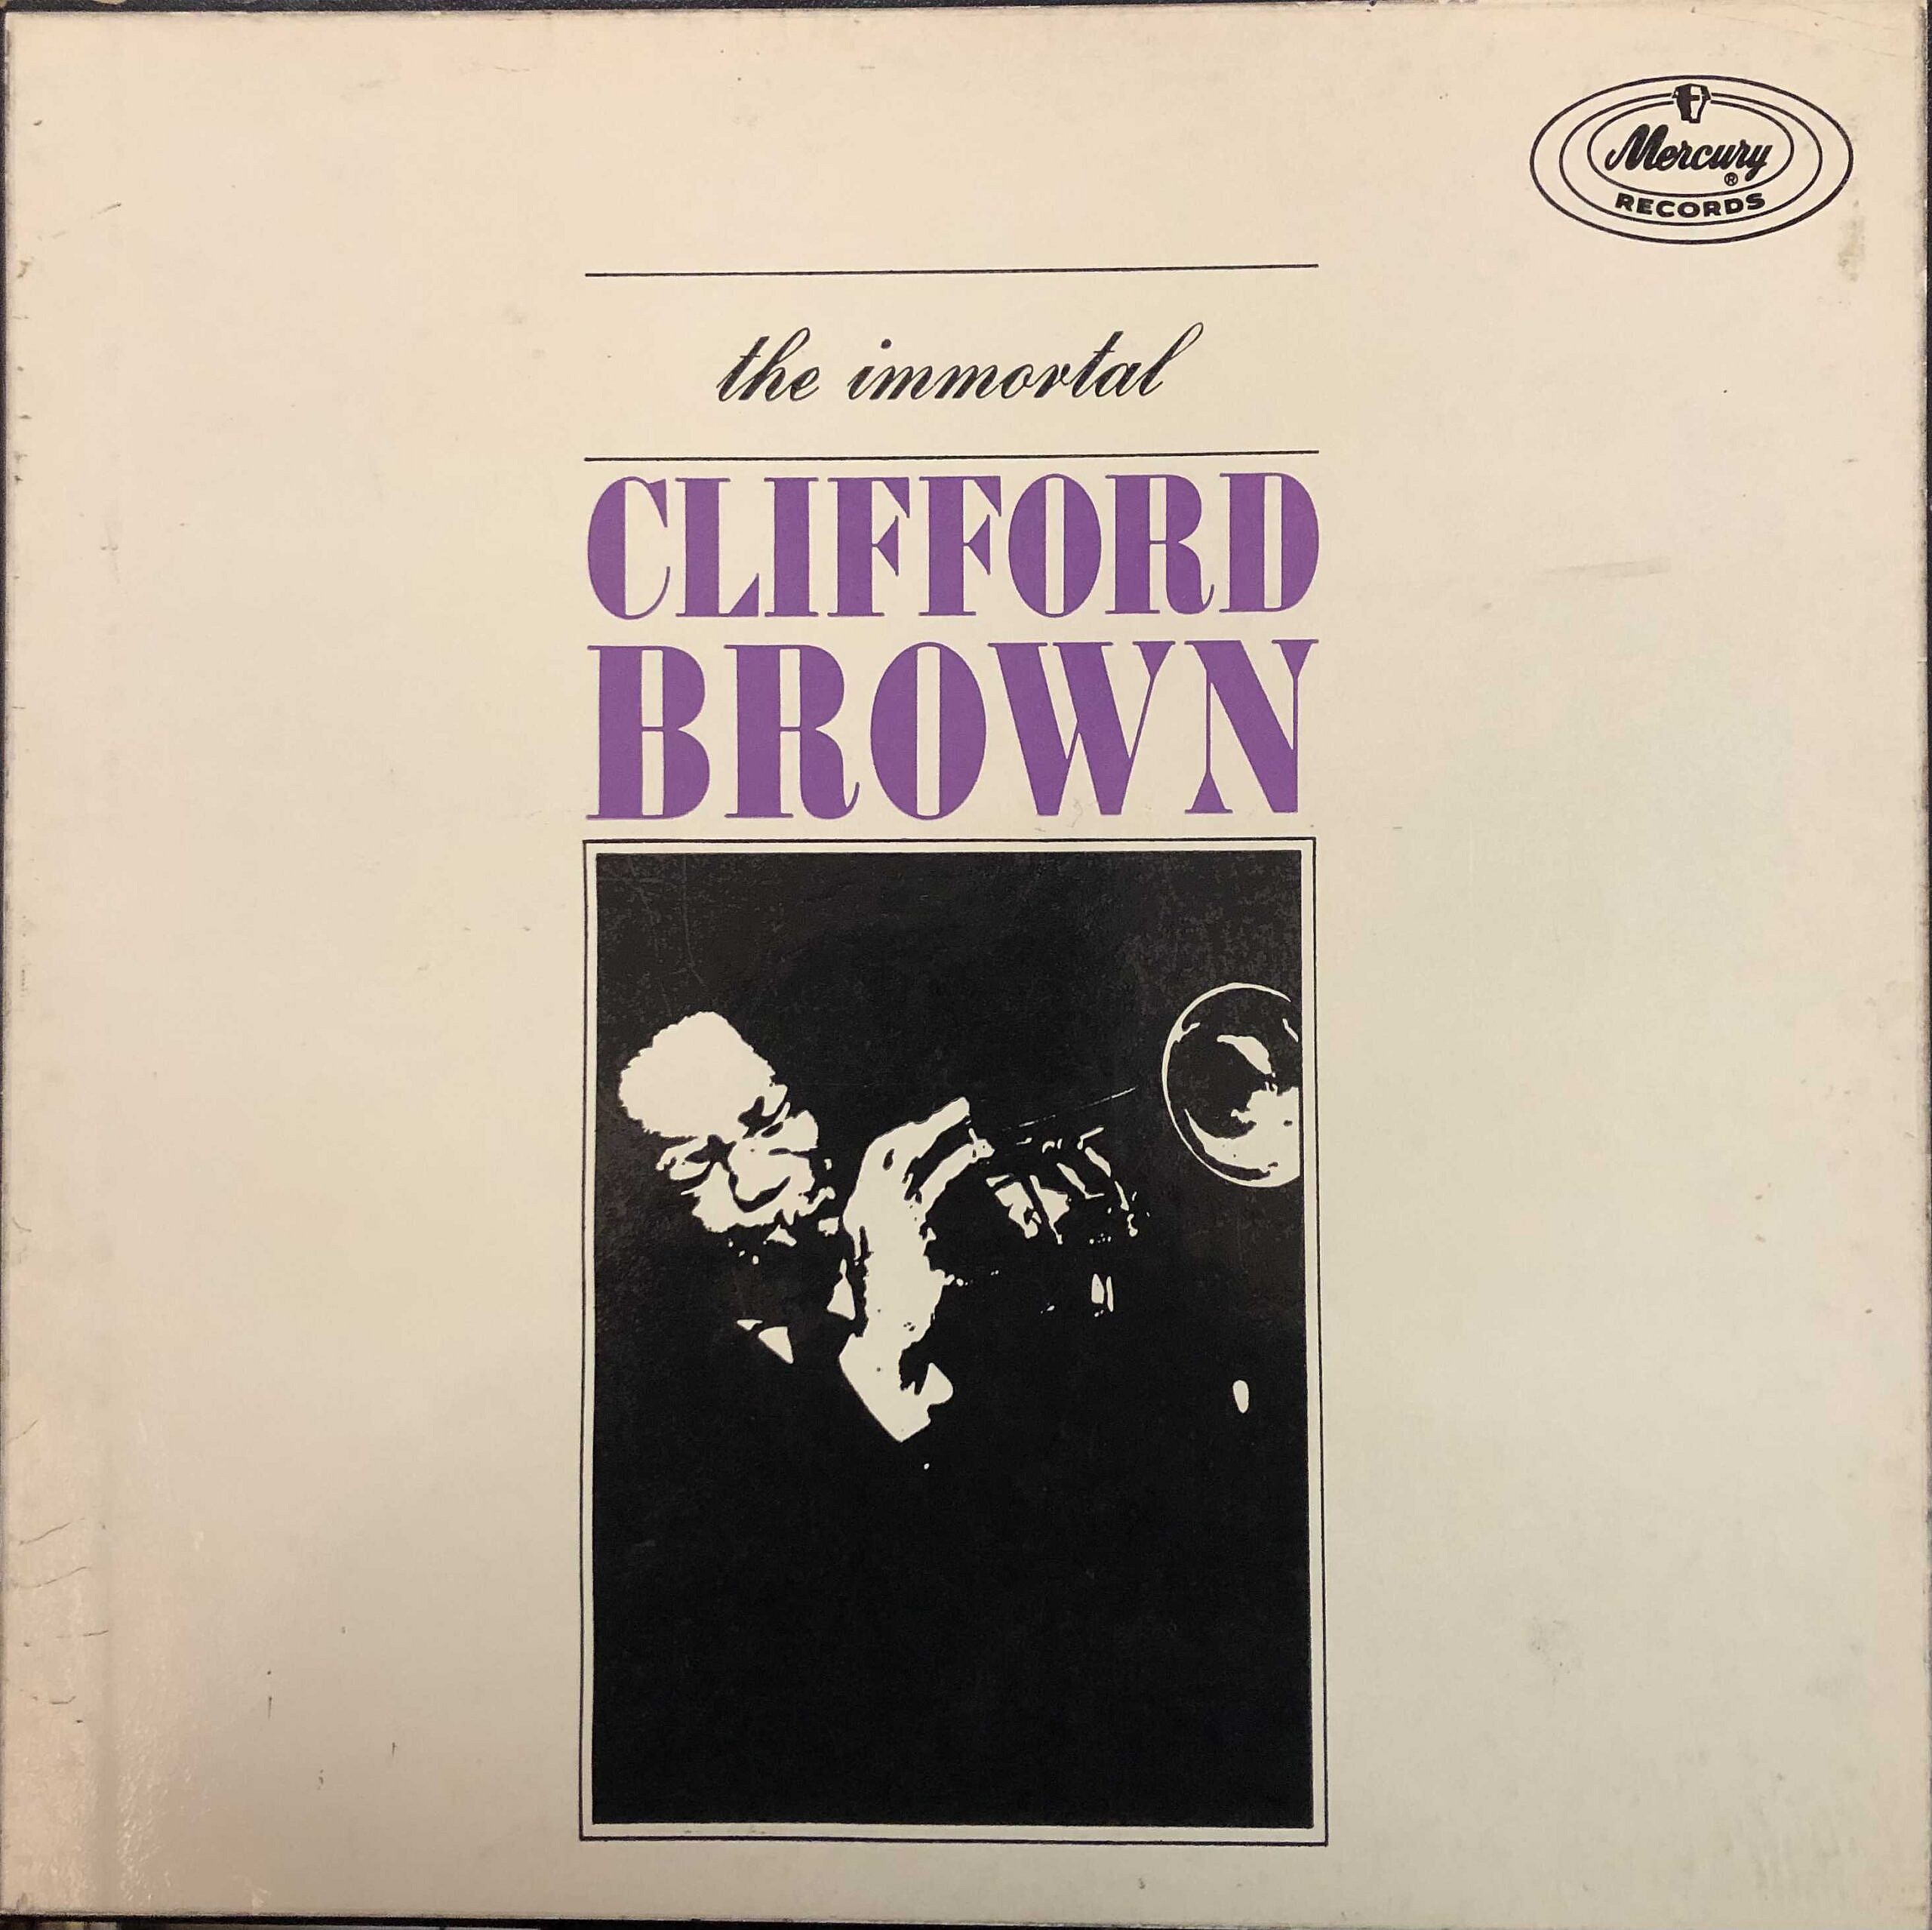 The Immortal Clifford Brown